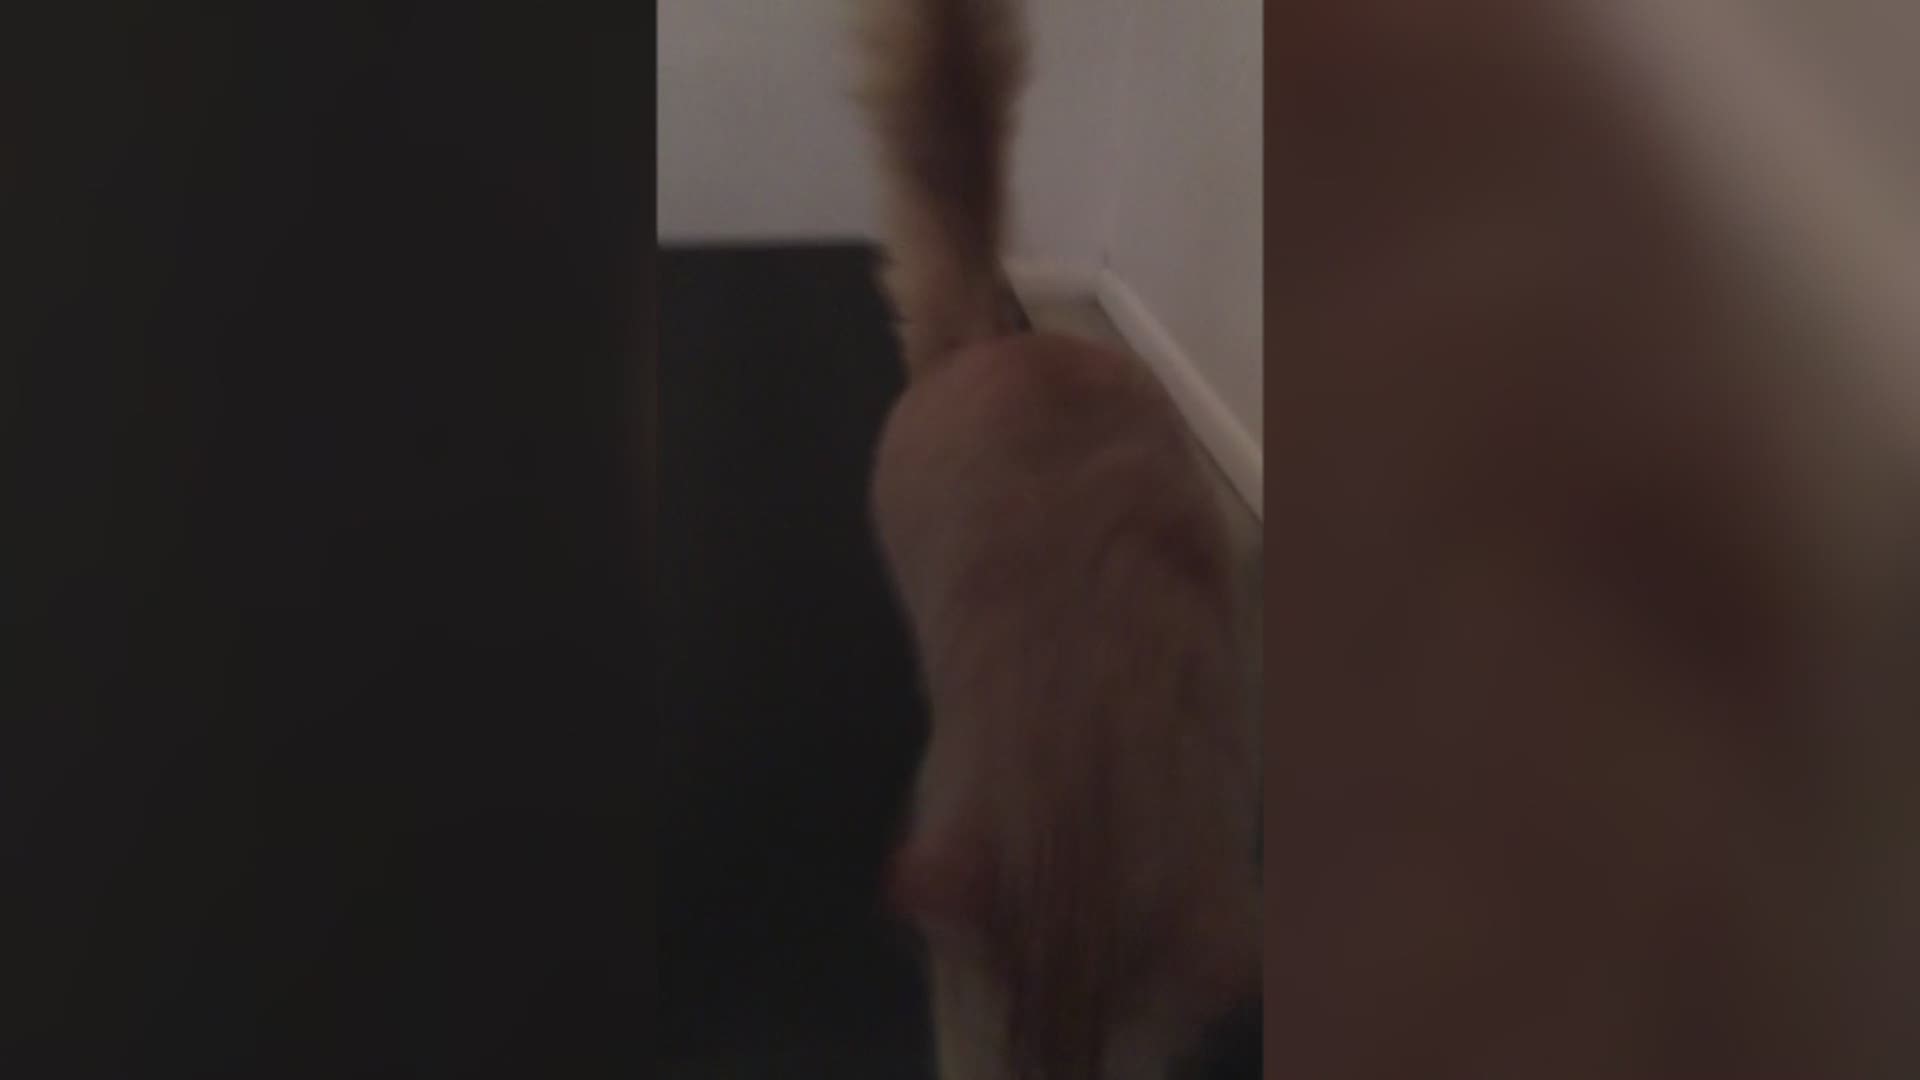 Elaine Rudolph of Norfolk shared this video with 13News Now. She called it "Kitty Staying in Shape on Treadmill." Rudolph wrote: "One of my rescue Kitties, Oliver, loves the treadmill. No kidding. I turn it off and he cries to get back on it. Was trying t